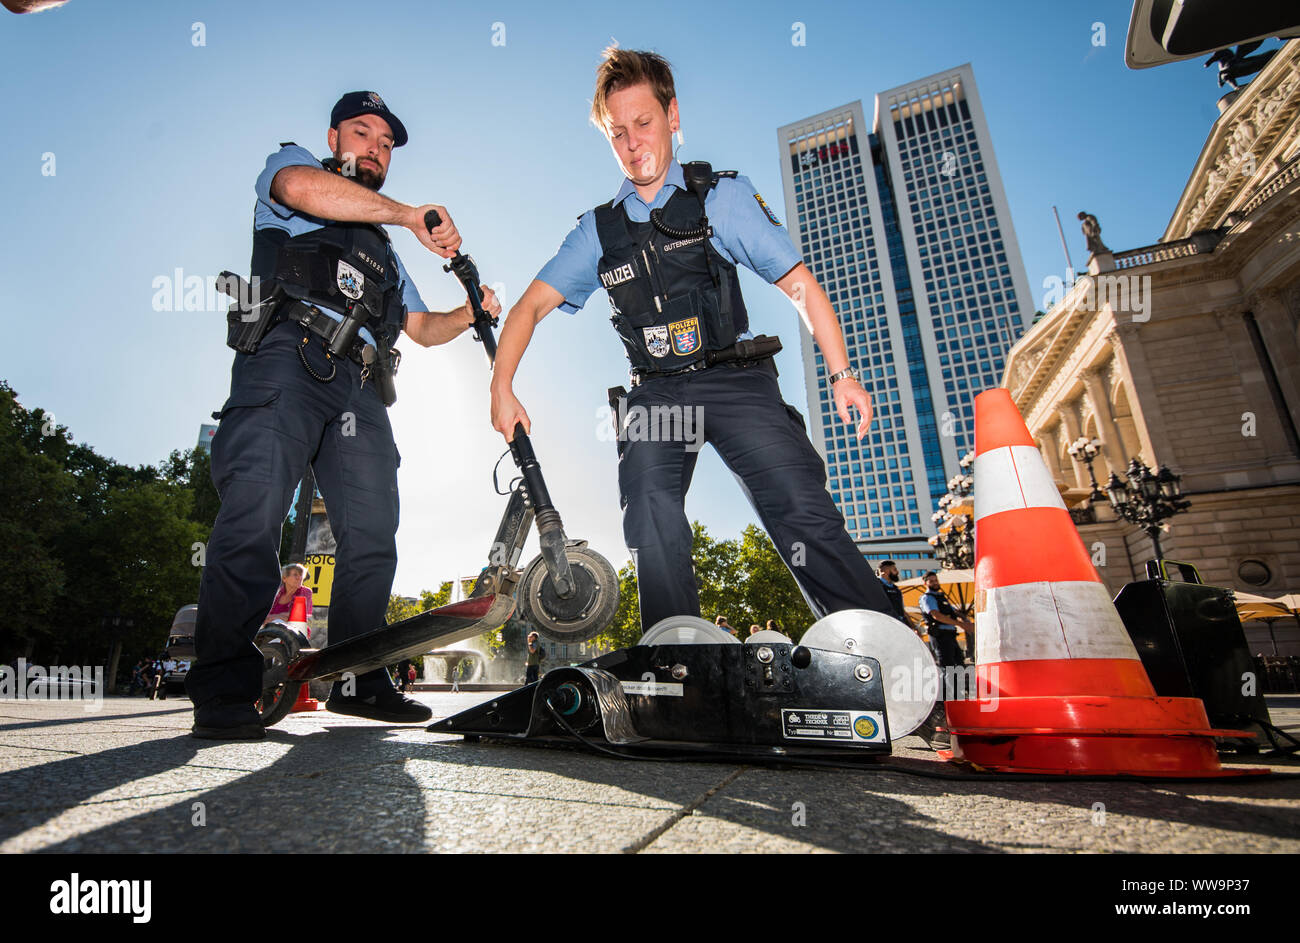 04 September 2019, Hessen, Frankfurt/Main: Policemen check an e-scooter on  the chassis dynamometer. Police officers check e-scooters in front of the  Alte Oper. According to police reports, an electric pedal scooter was